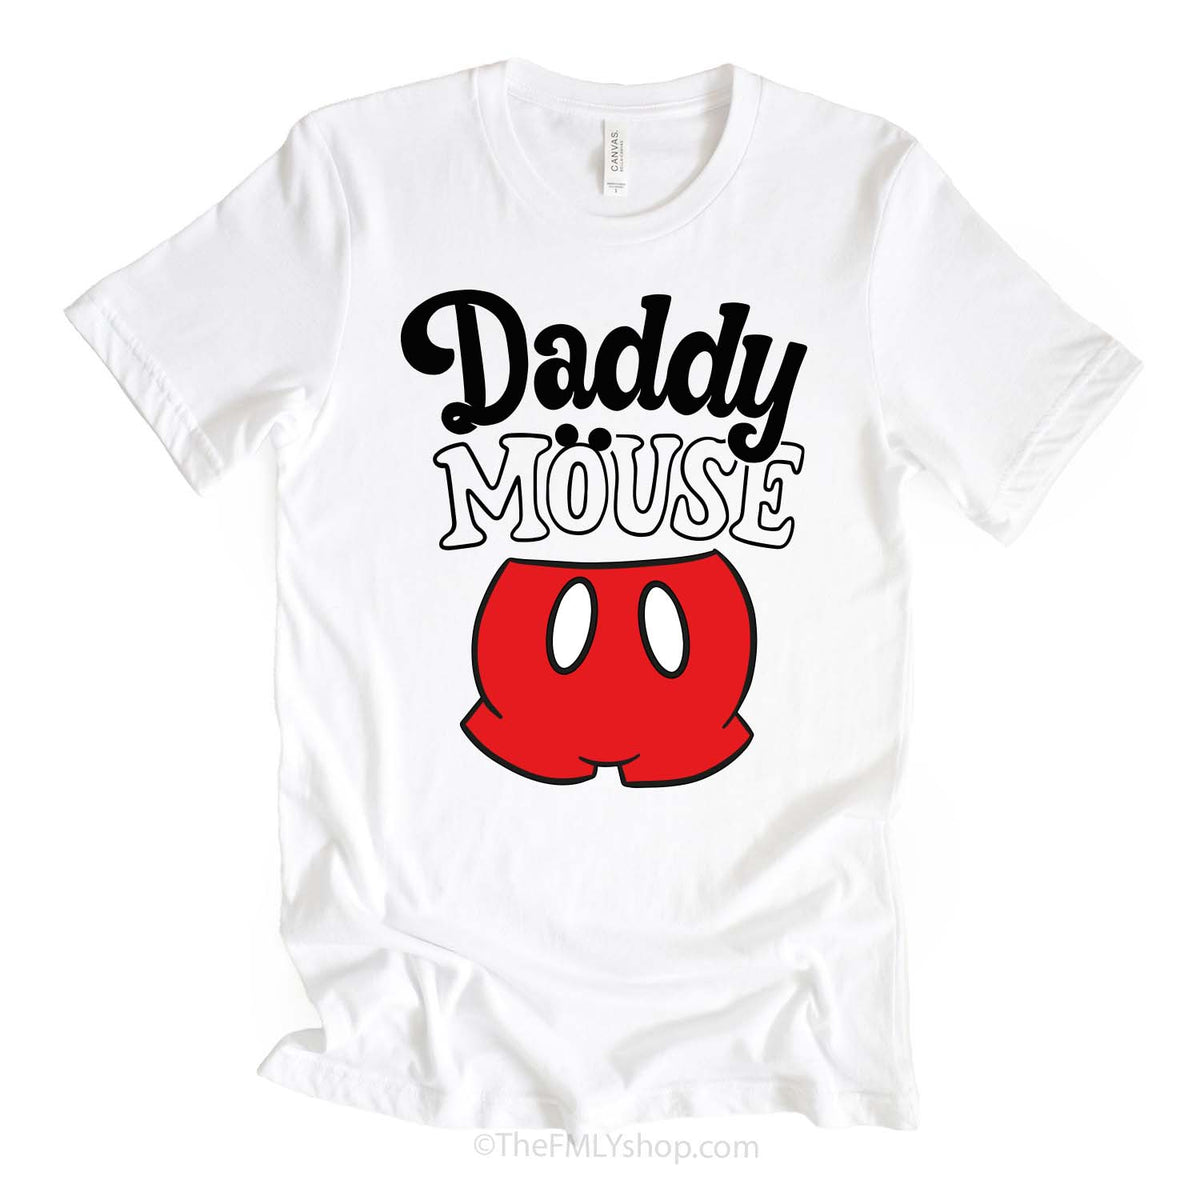 Daddy Mouse Tee